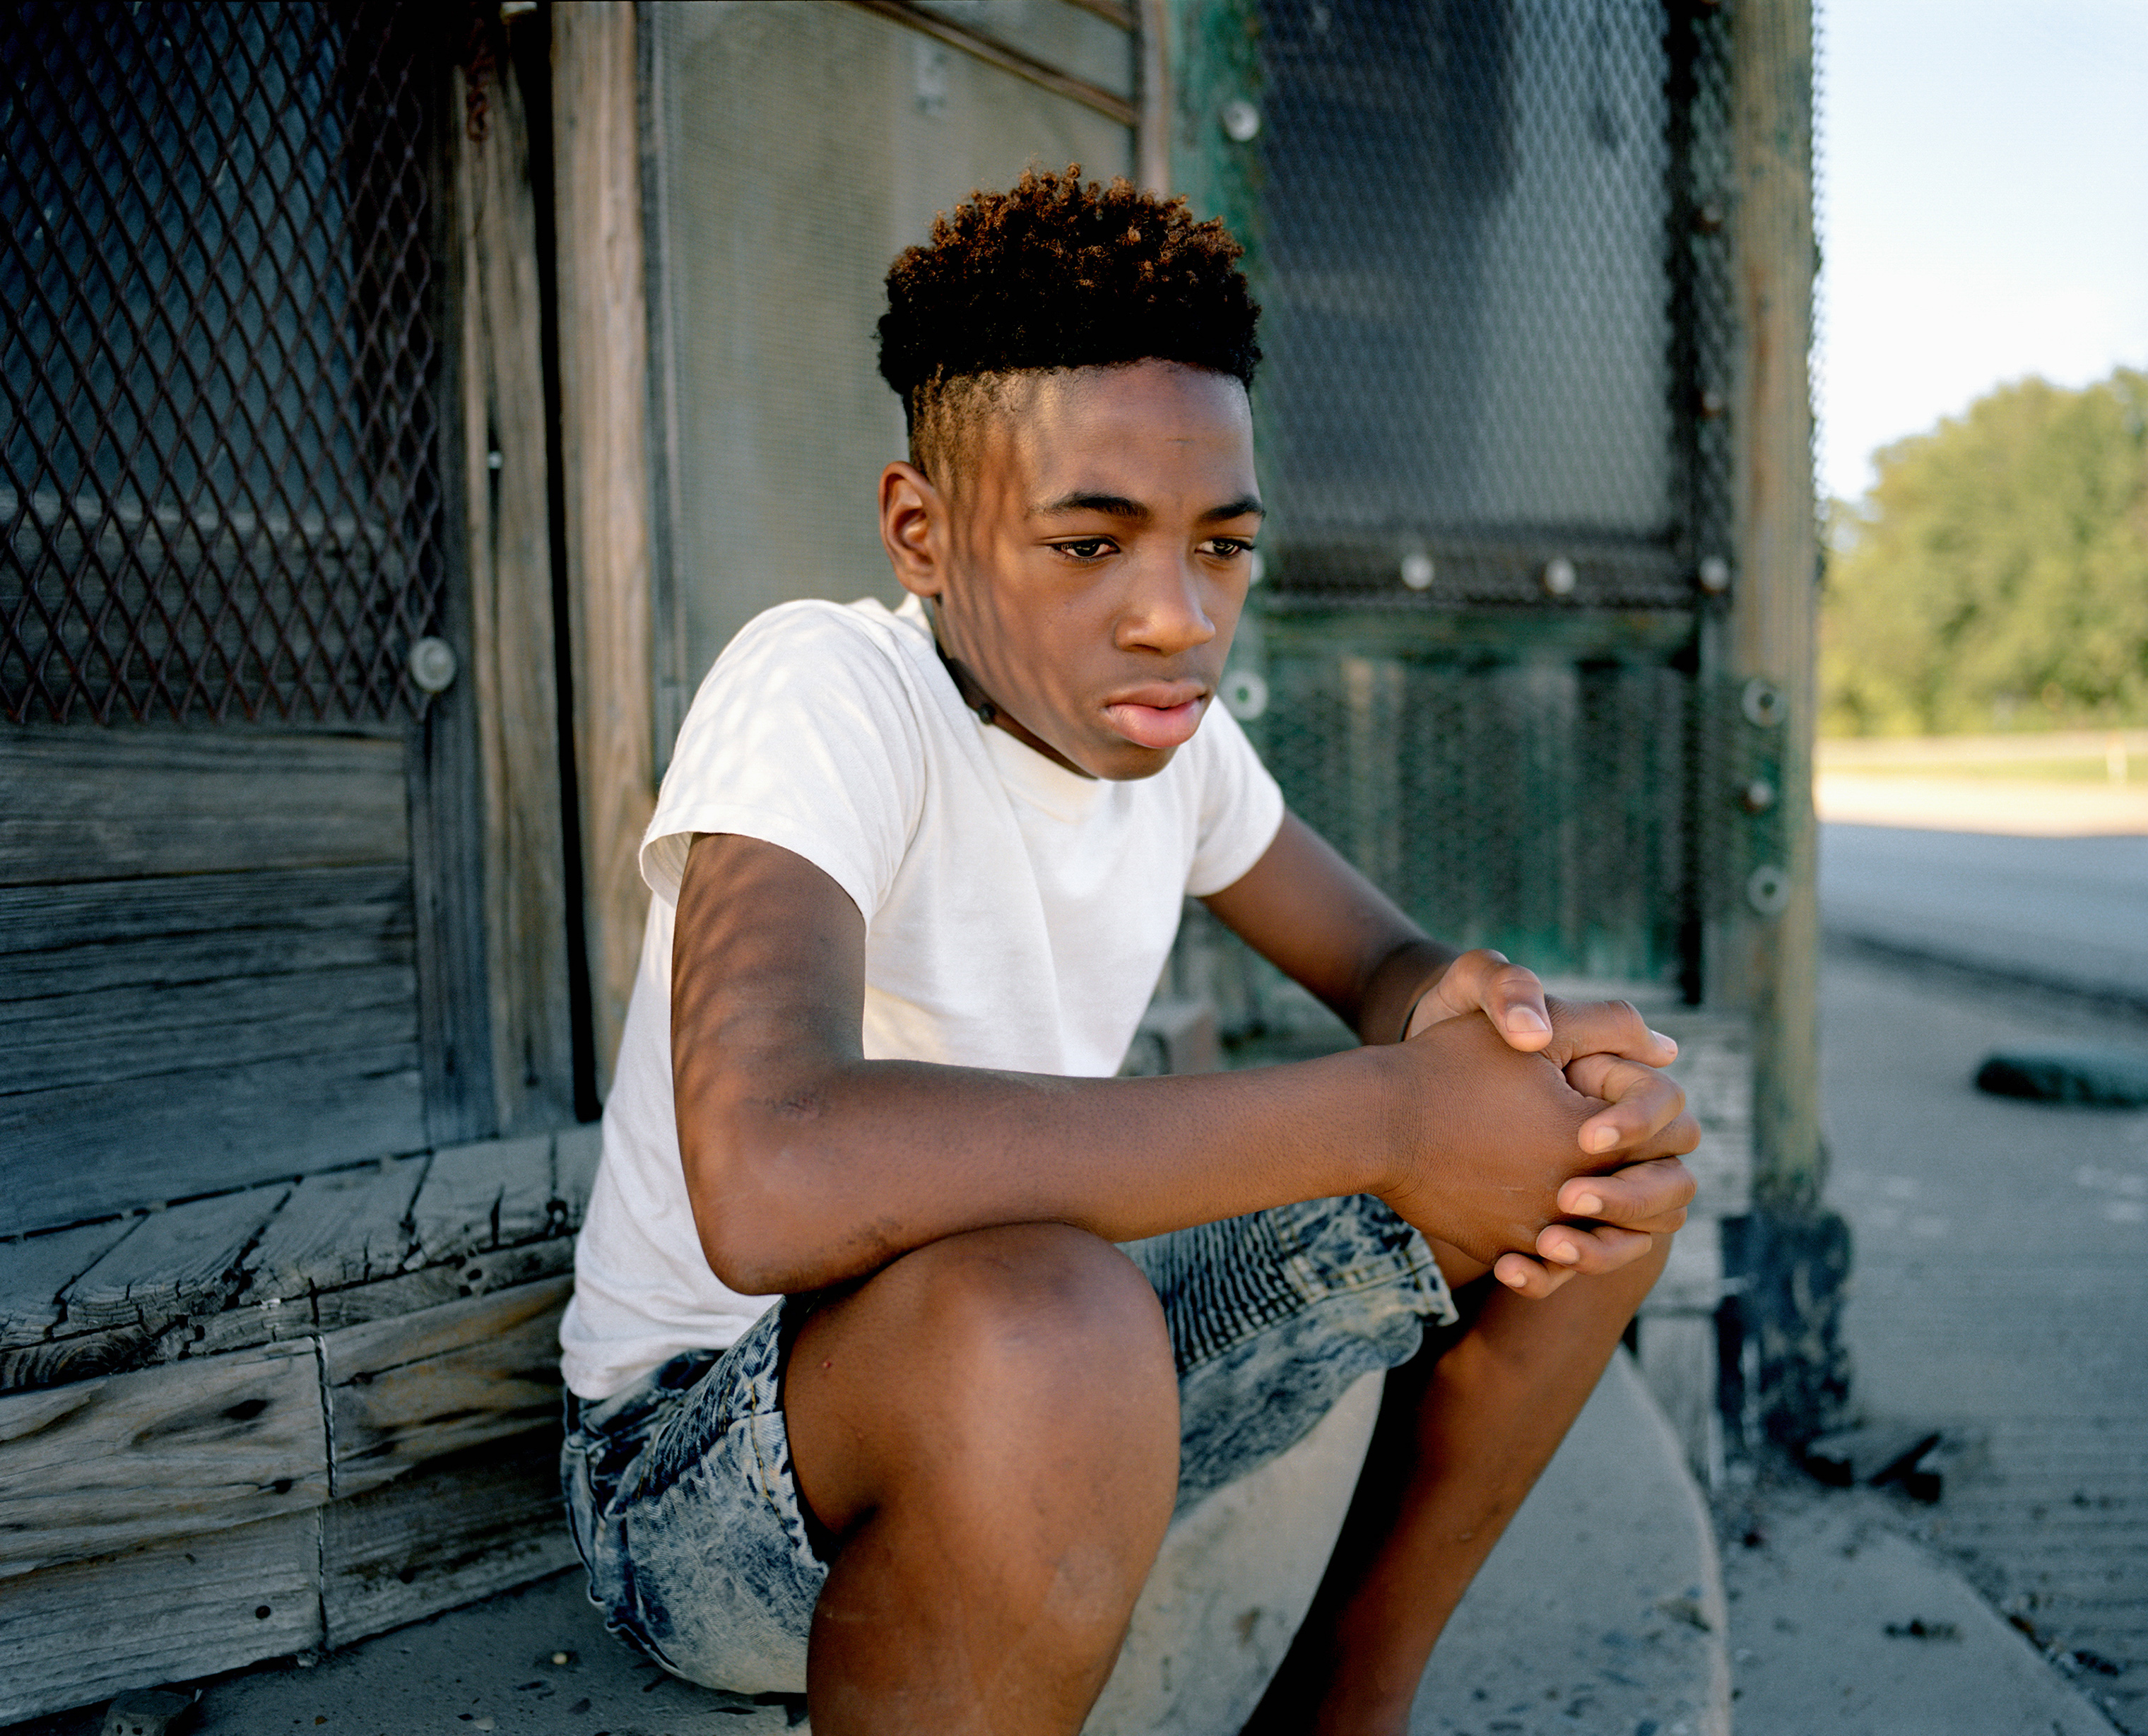 Dequincy Wilson sits on the steps of an old general store located in downtown Elaine, Ark. The community rarely brings up the 1919 Race Massacre, and the younger generation has little to no remembrance of the town’s convoluted history. (Johnathon Kelso)